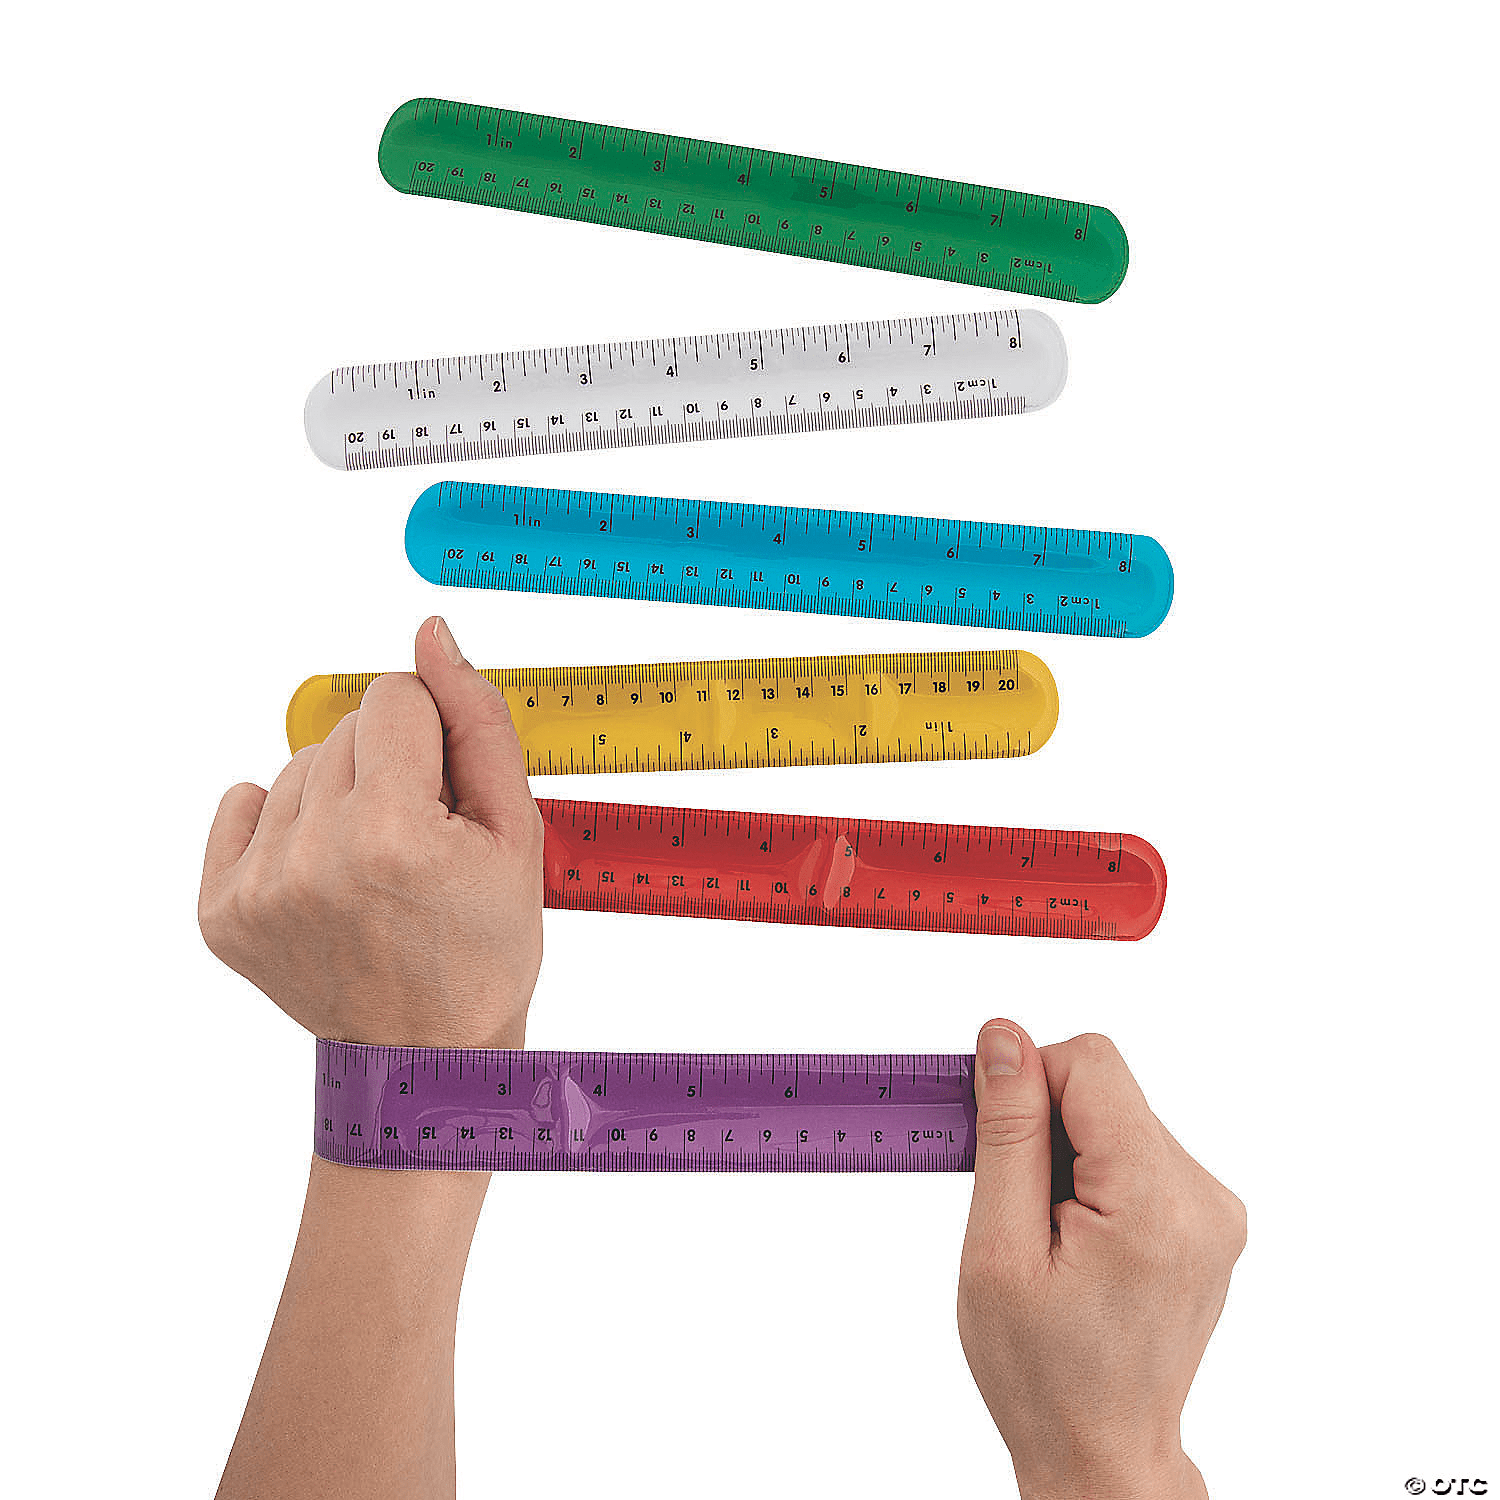 90s childhood things of Malaysian millennials - snap bracelets